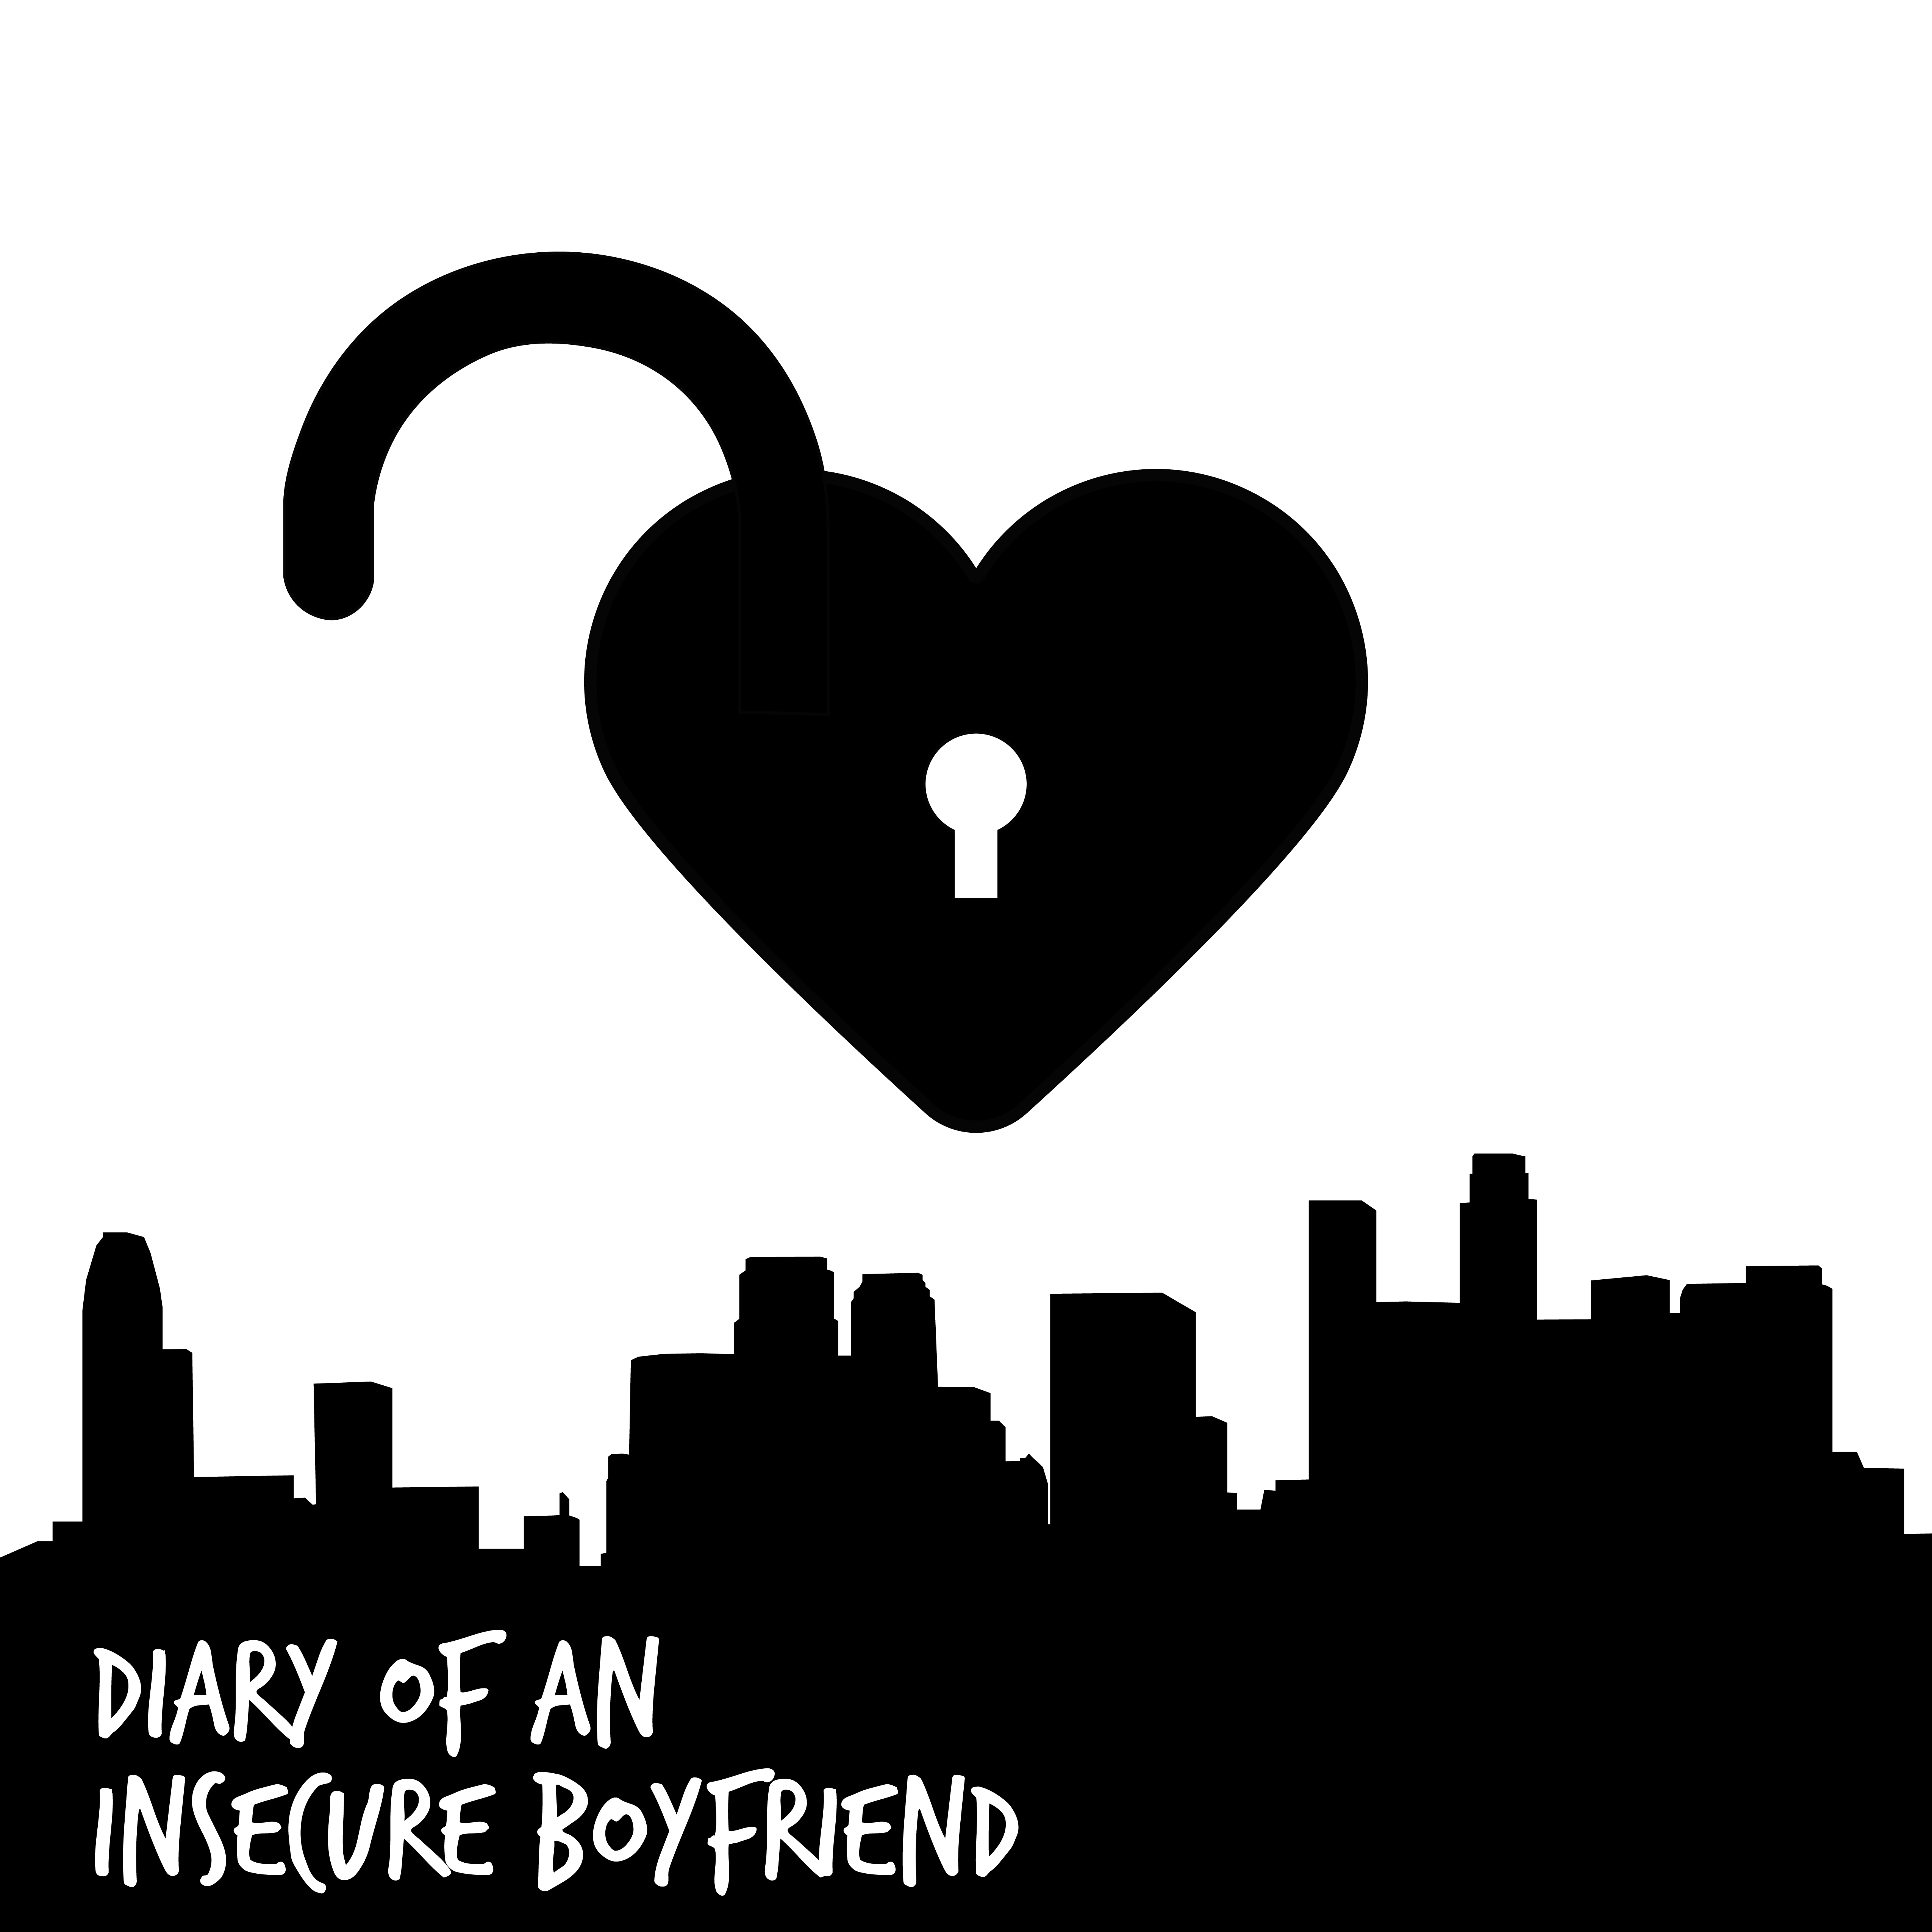 Diary of an Insecure Boyfriend